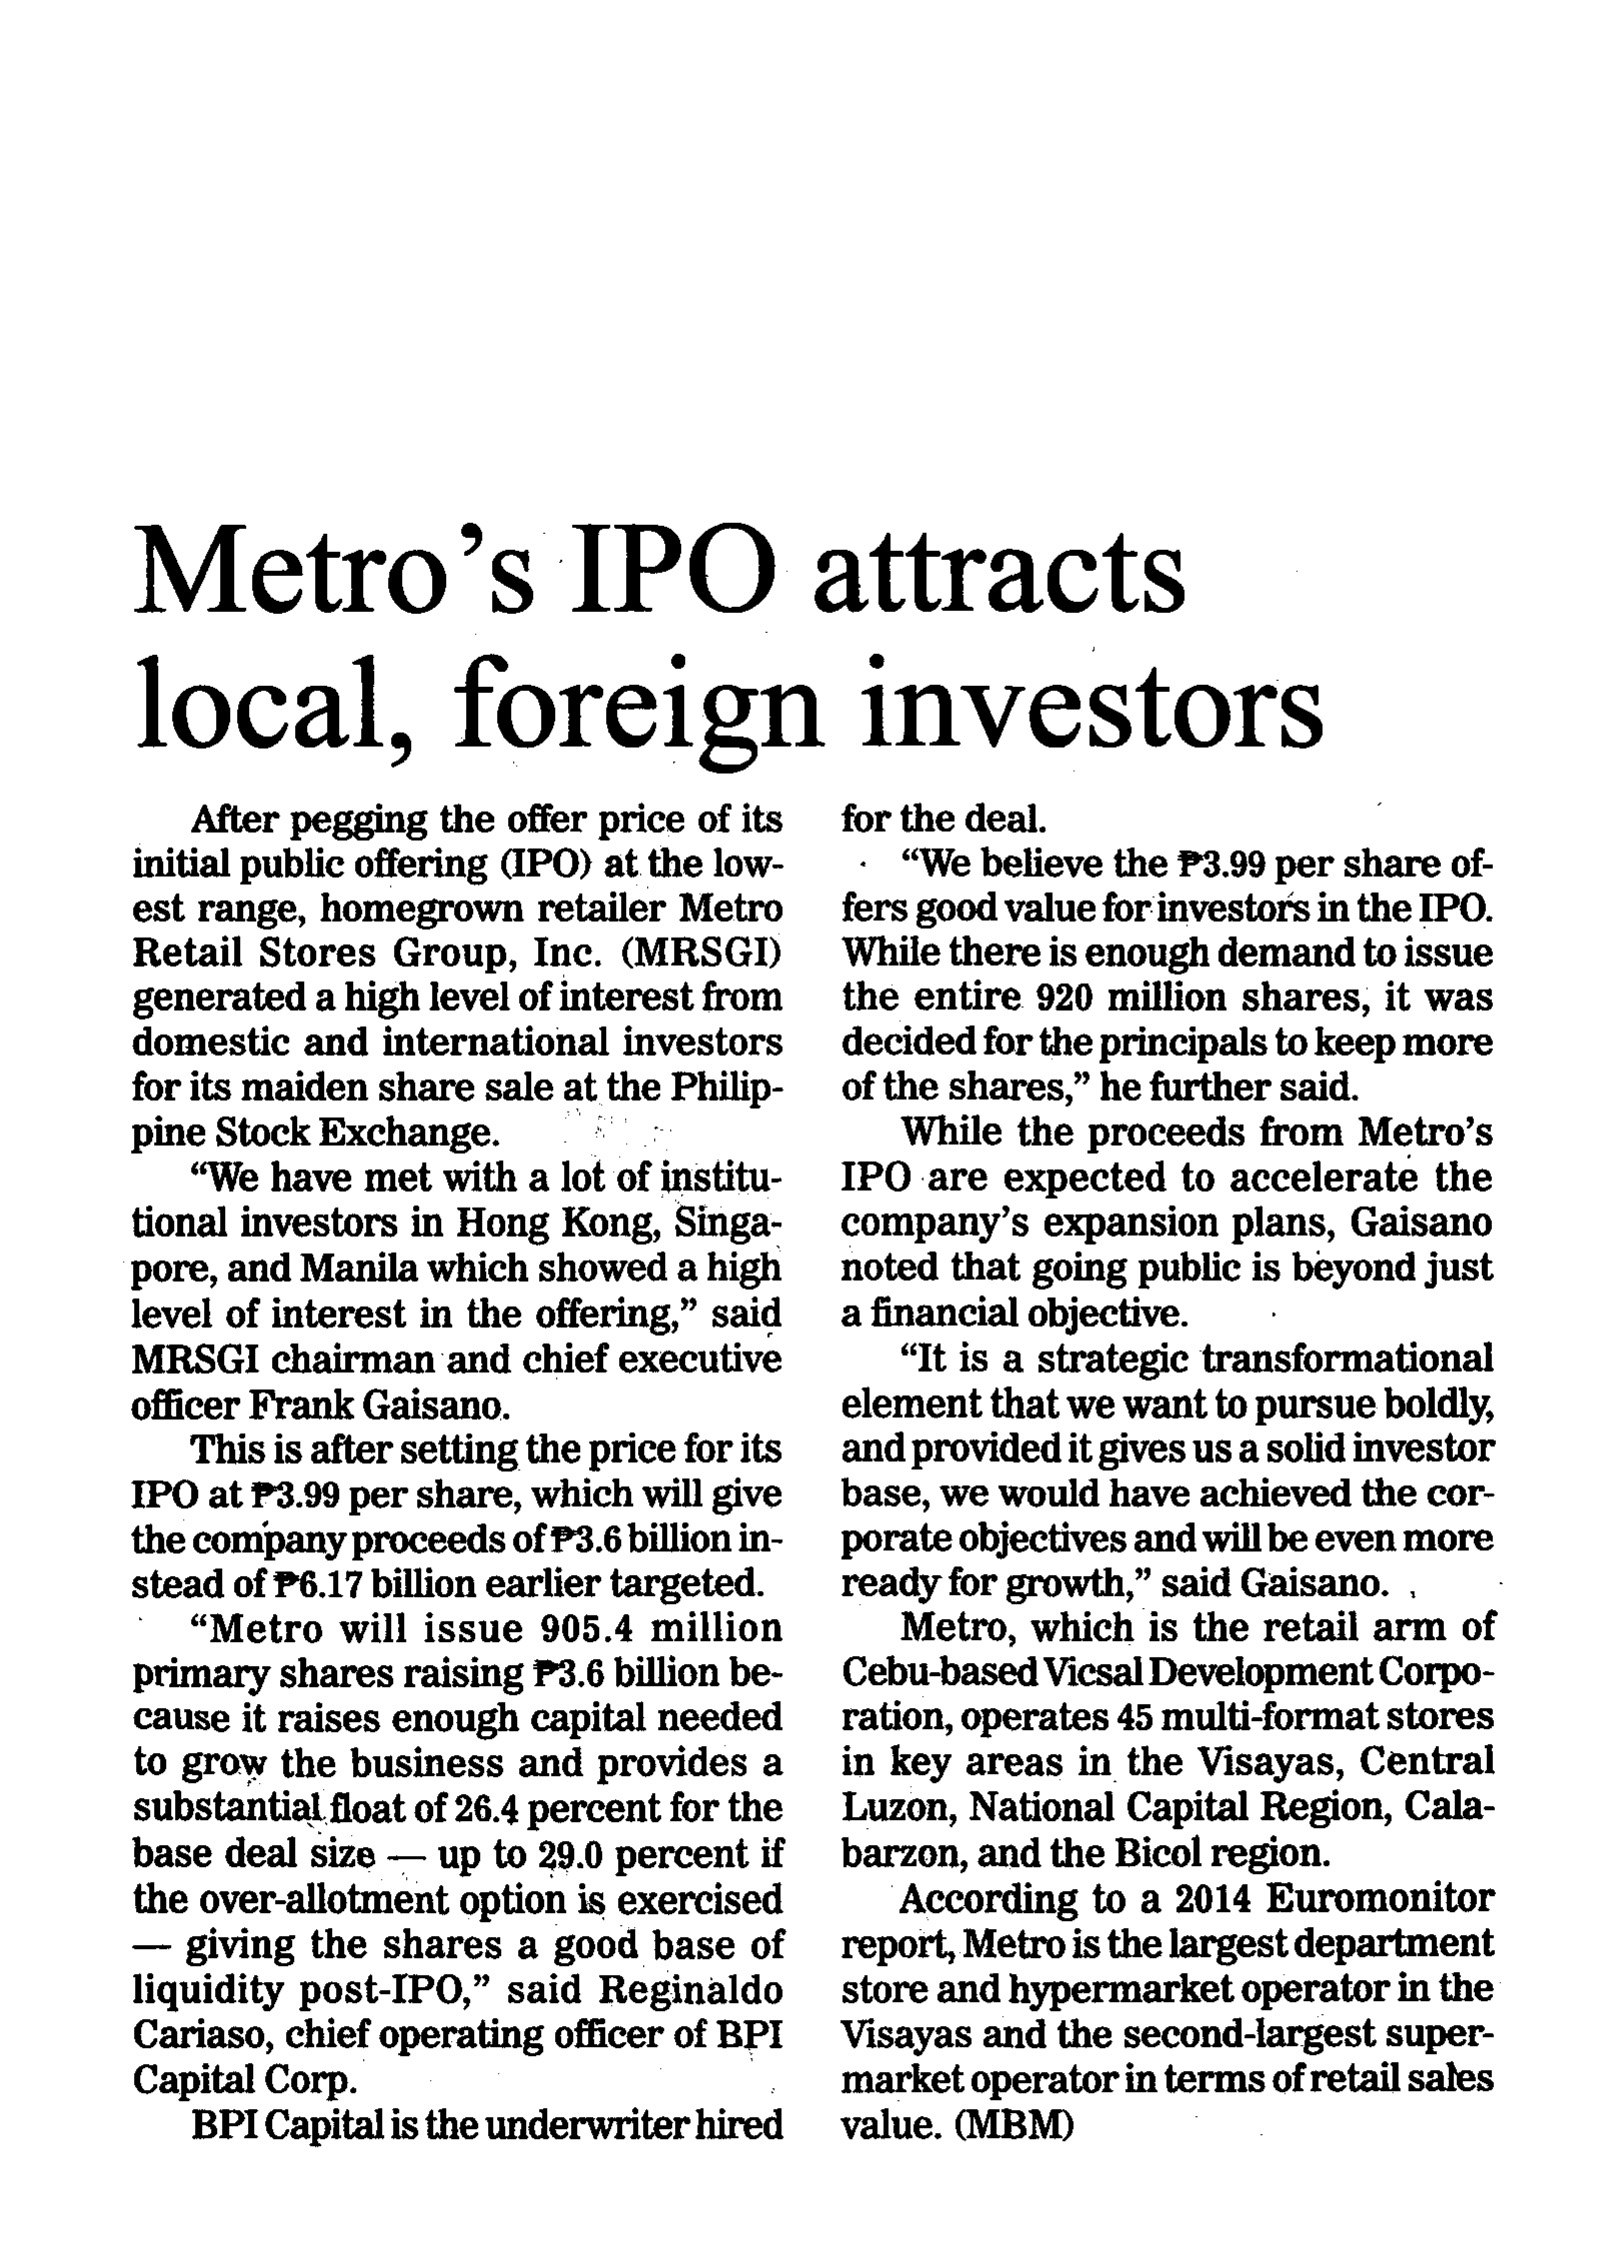 Metros IPO attracts local foreign investors Manila Bulletin